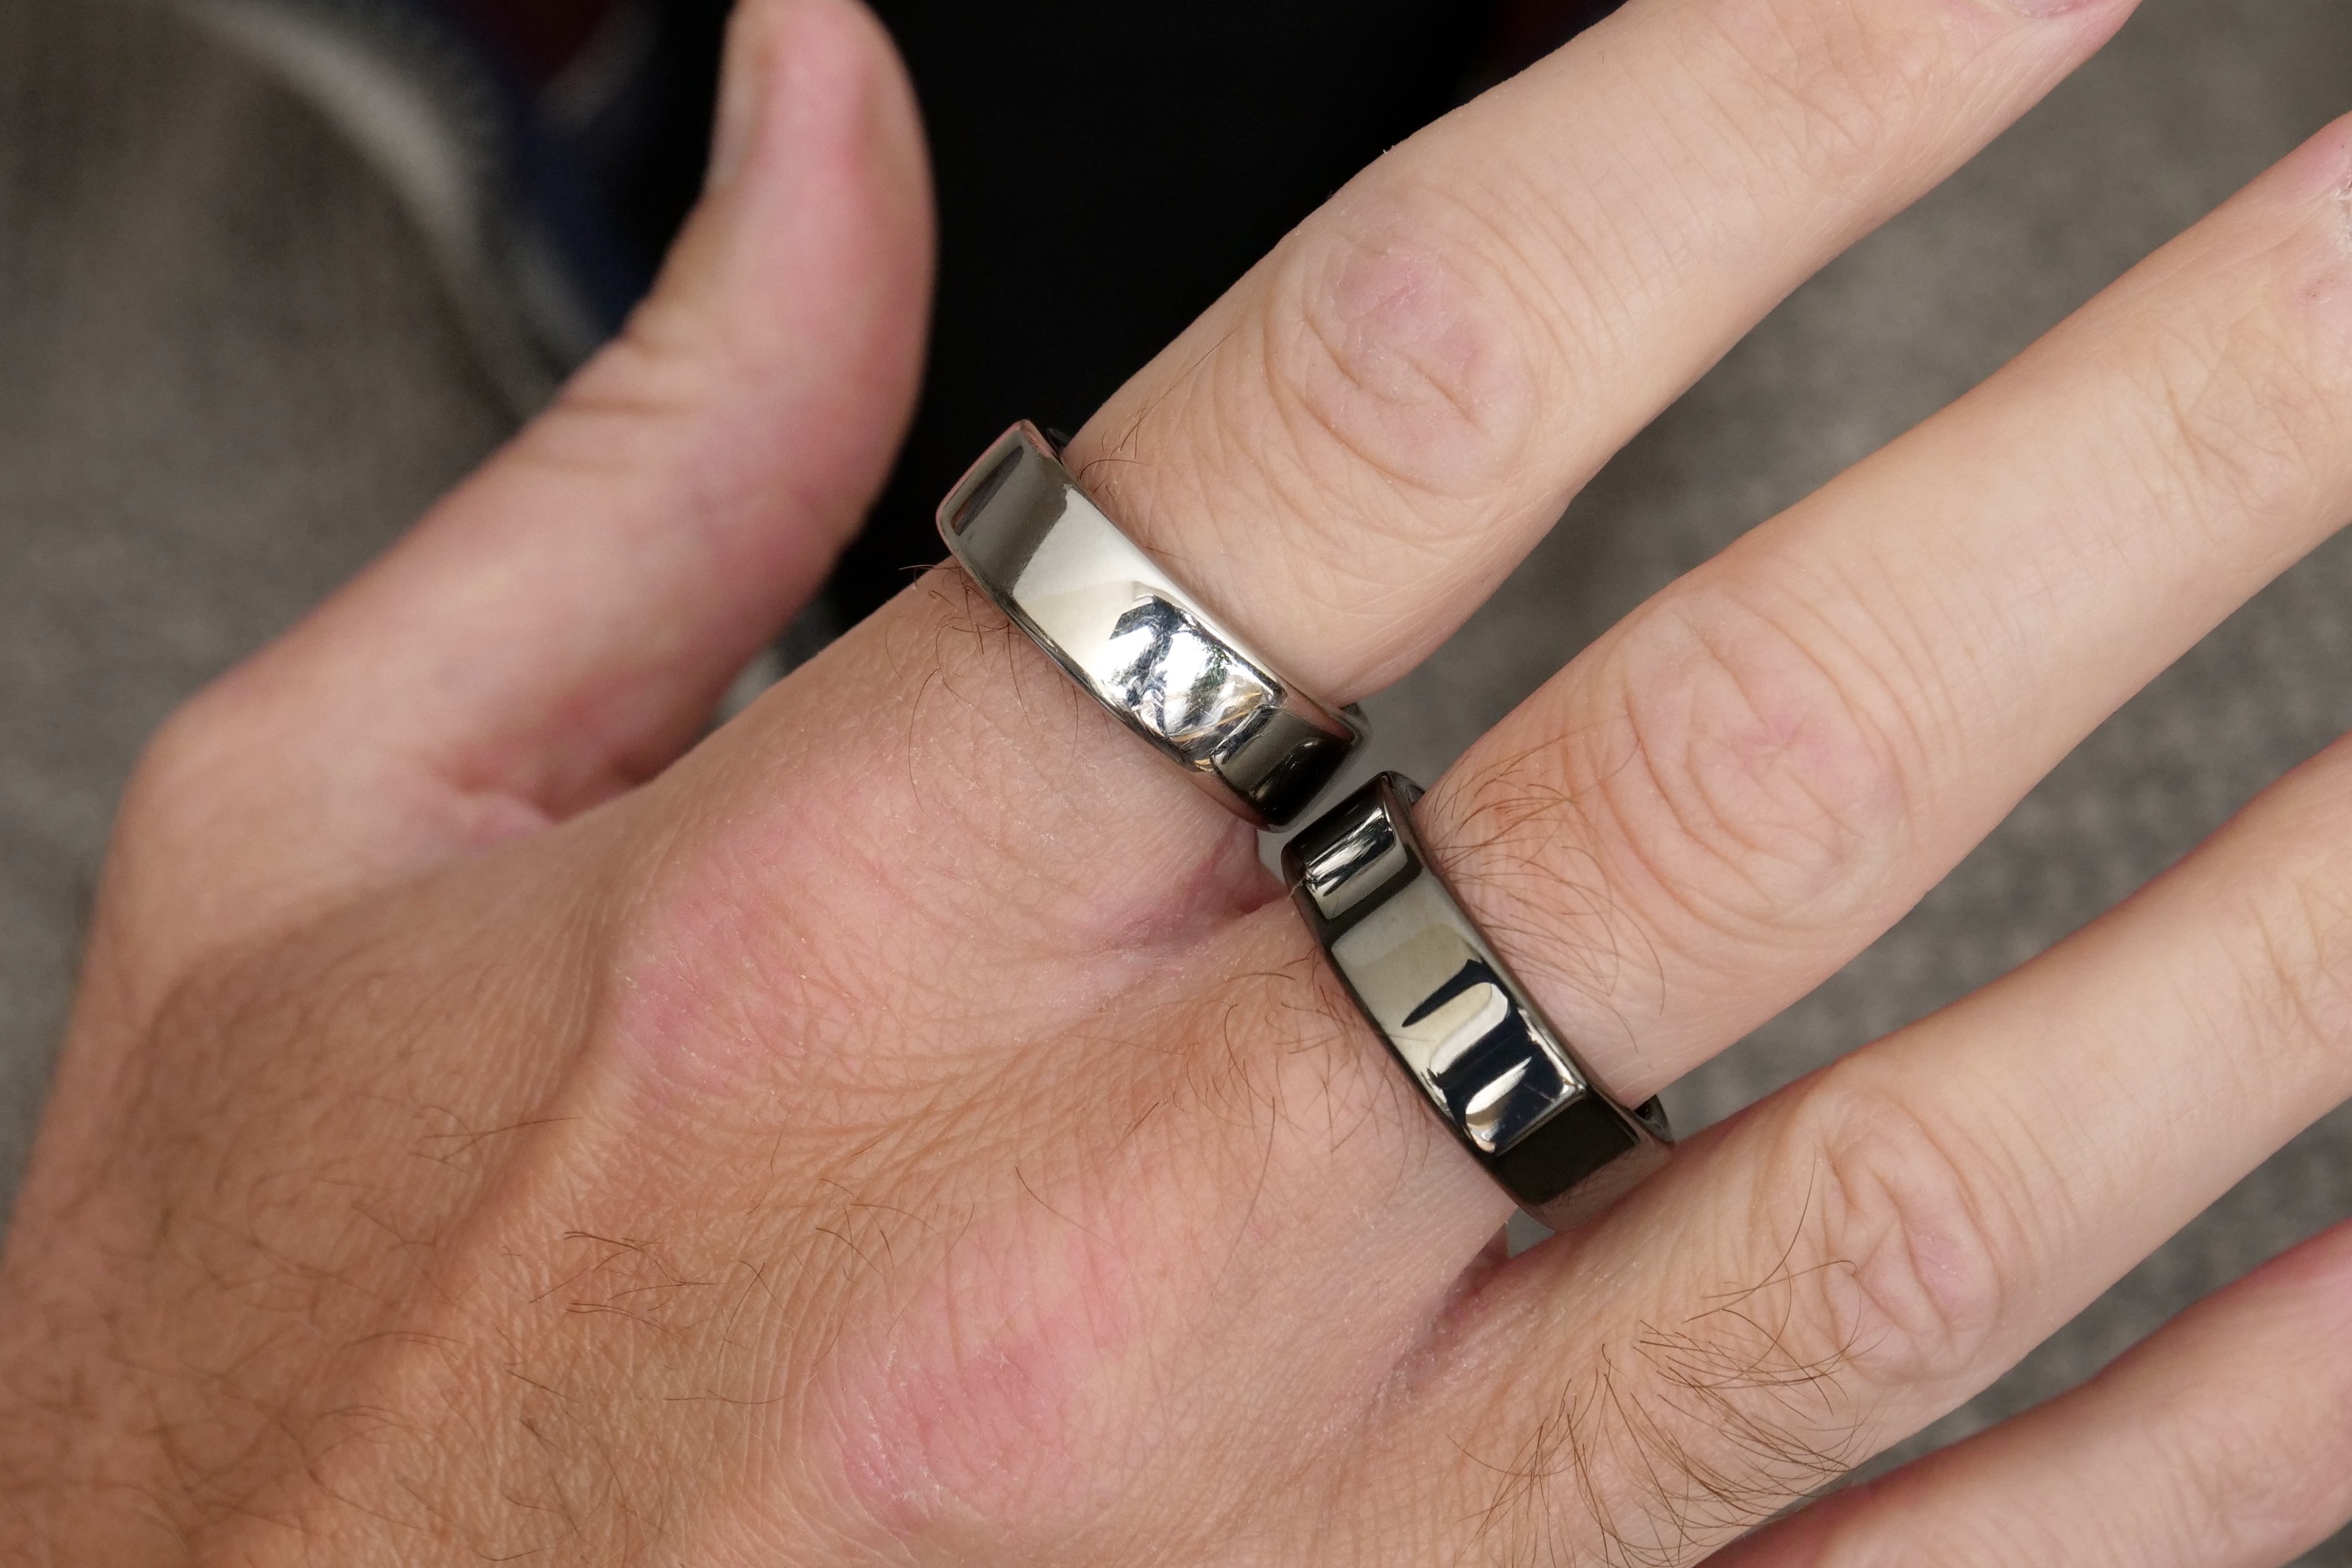 Ringly smart ring will buzz women's fingers later this year